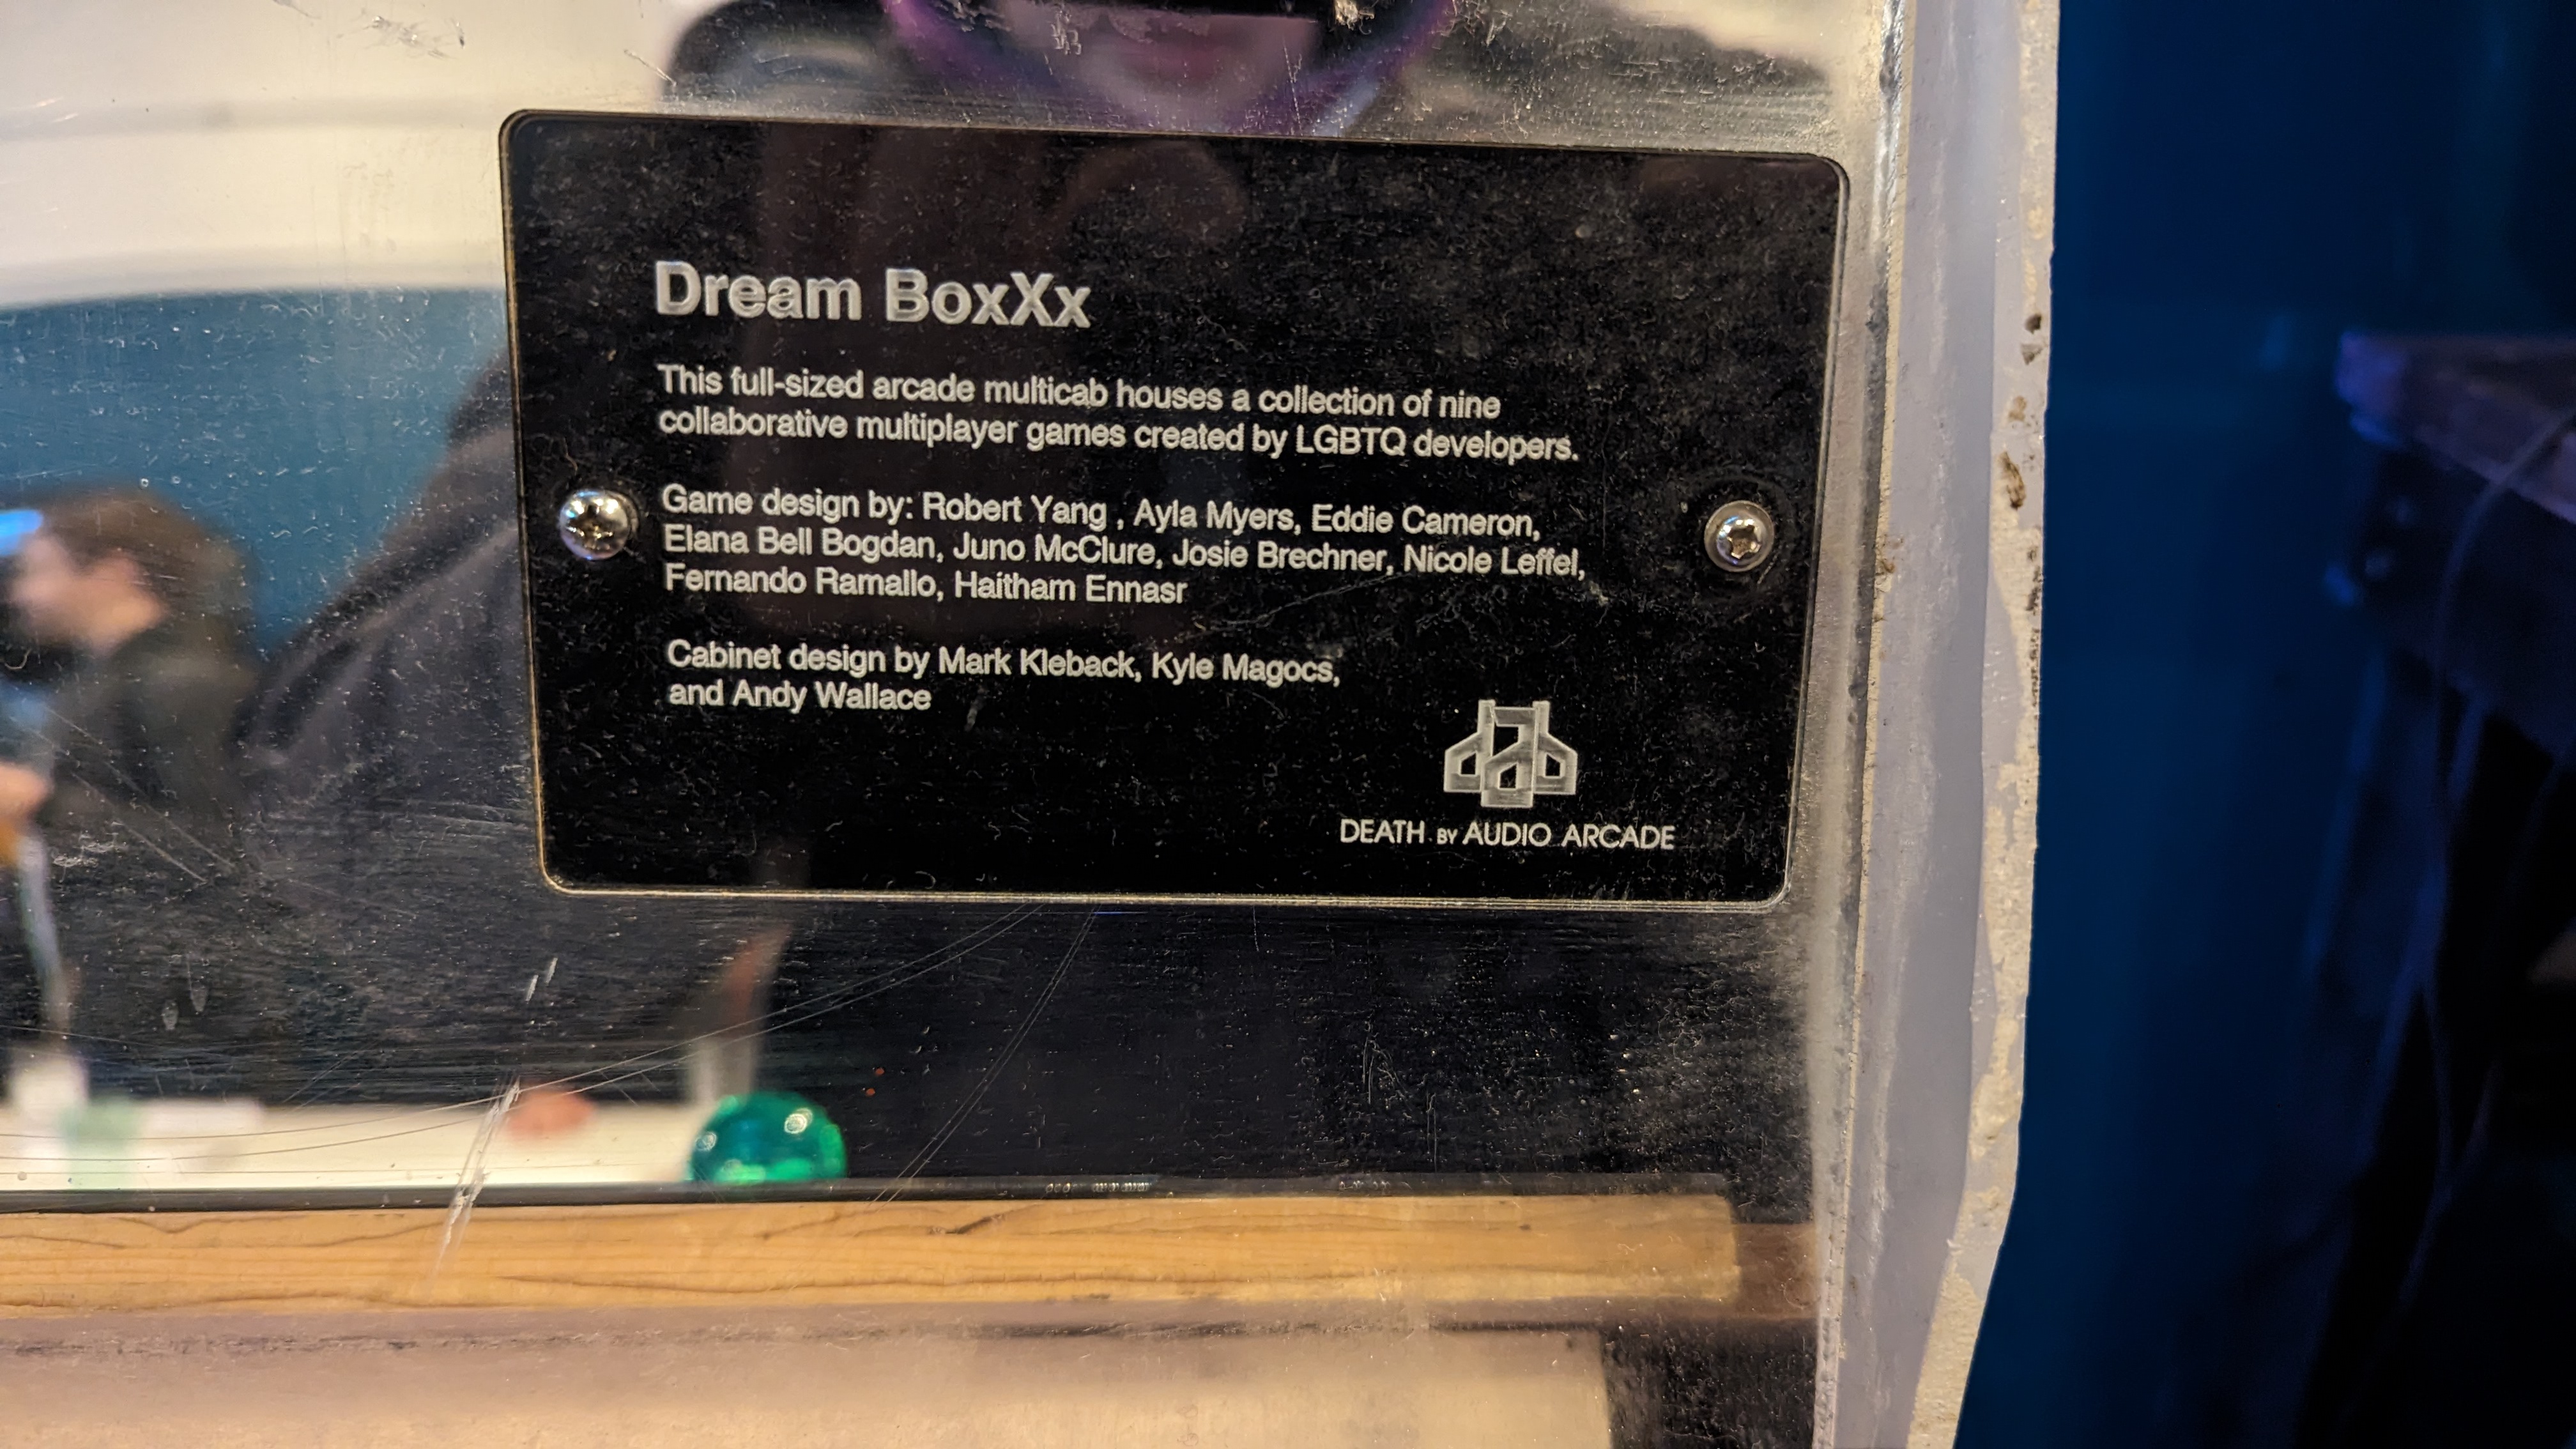 Dream BoxXx This full-sized arcade multicab houses a collection of nine collaborative multiplayer games created by LGBTQ developers. Game design by: Robert Yang, Ayla Myers, Eddie Cameron, Elana...